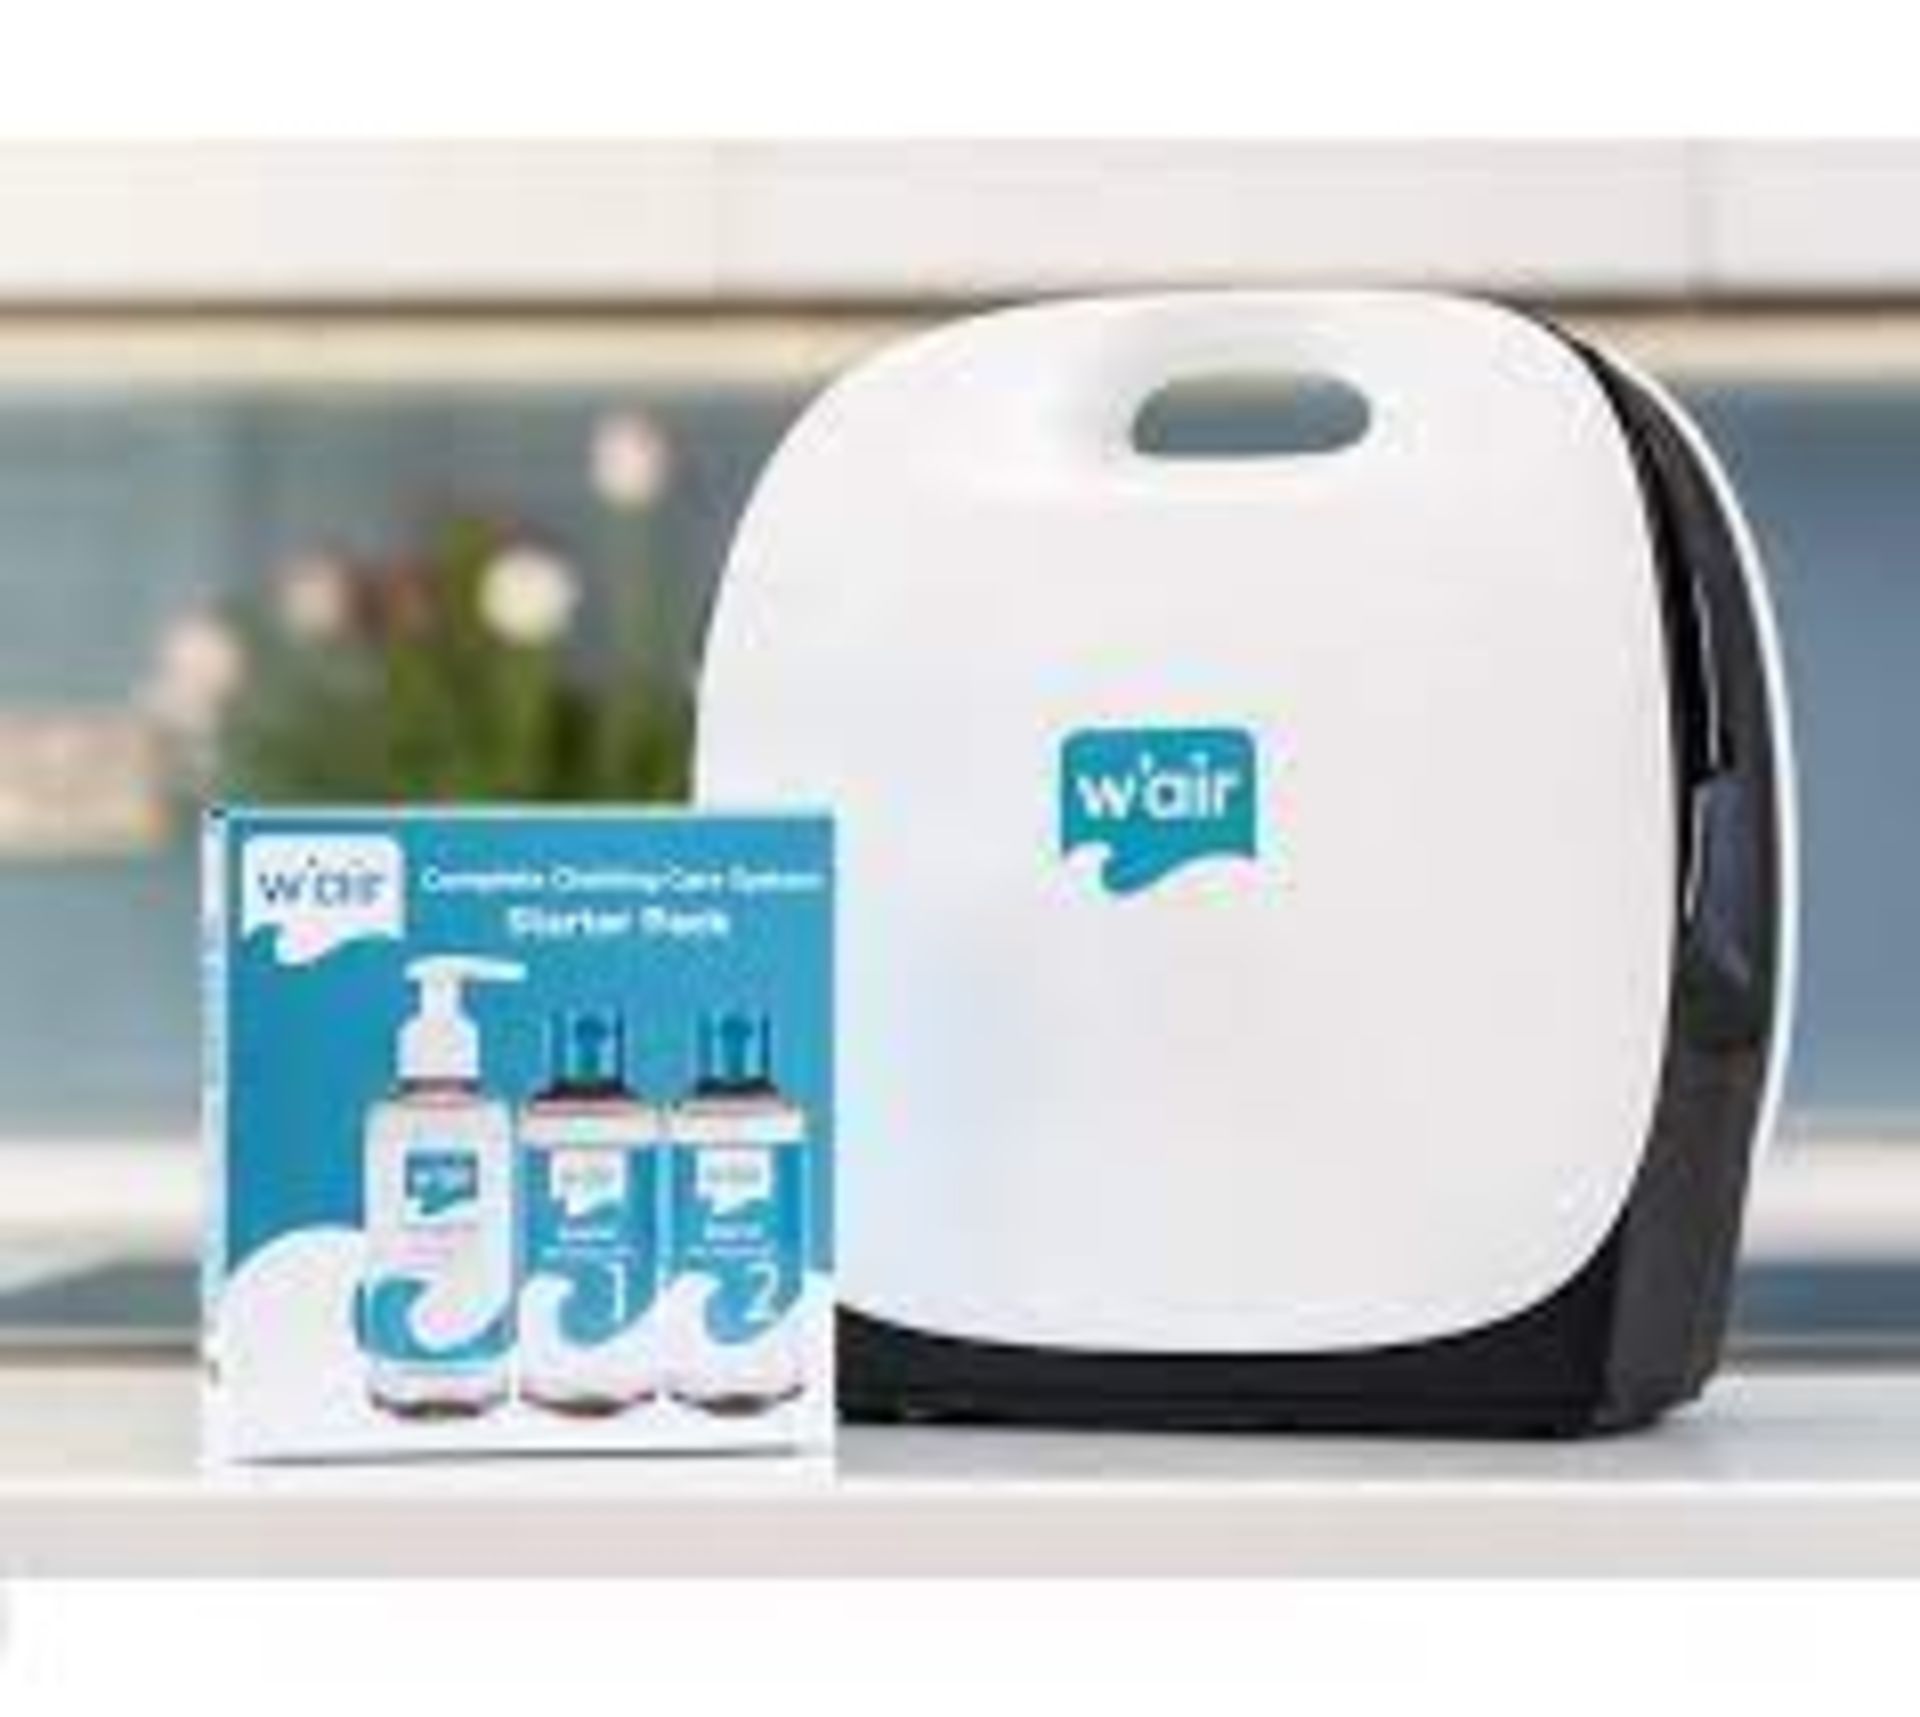 20 X BRAND NEW W'AIR SNEAKER CLEANING SYSTEMS RRP £299, The w'air uses hydrodynamic technology - Image 6 of 6